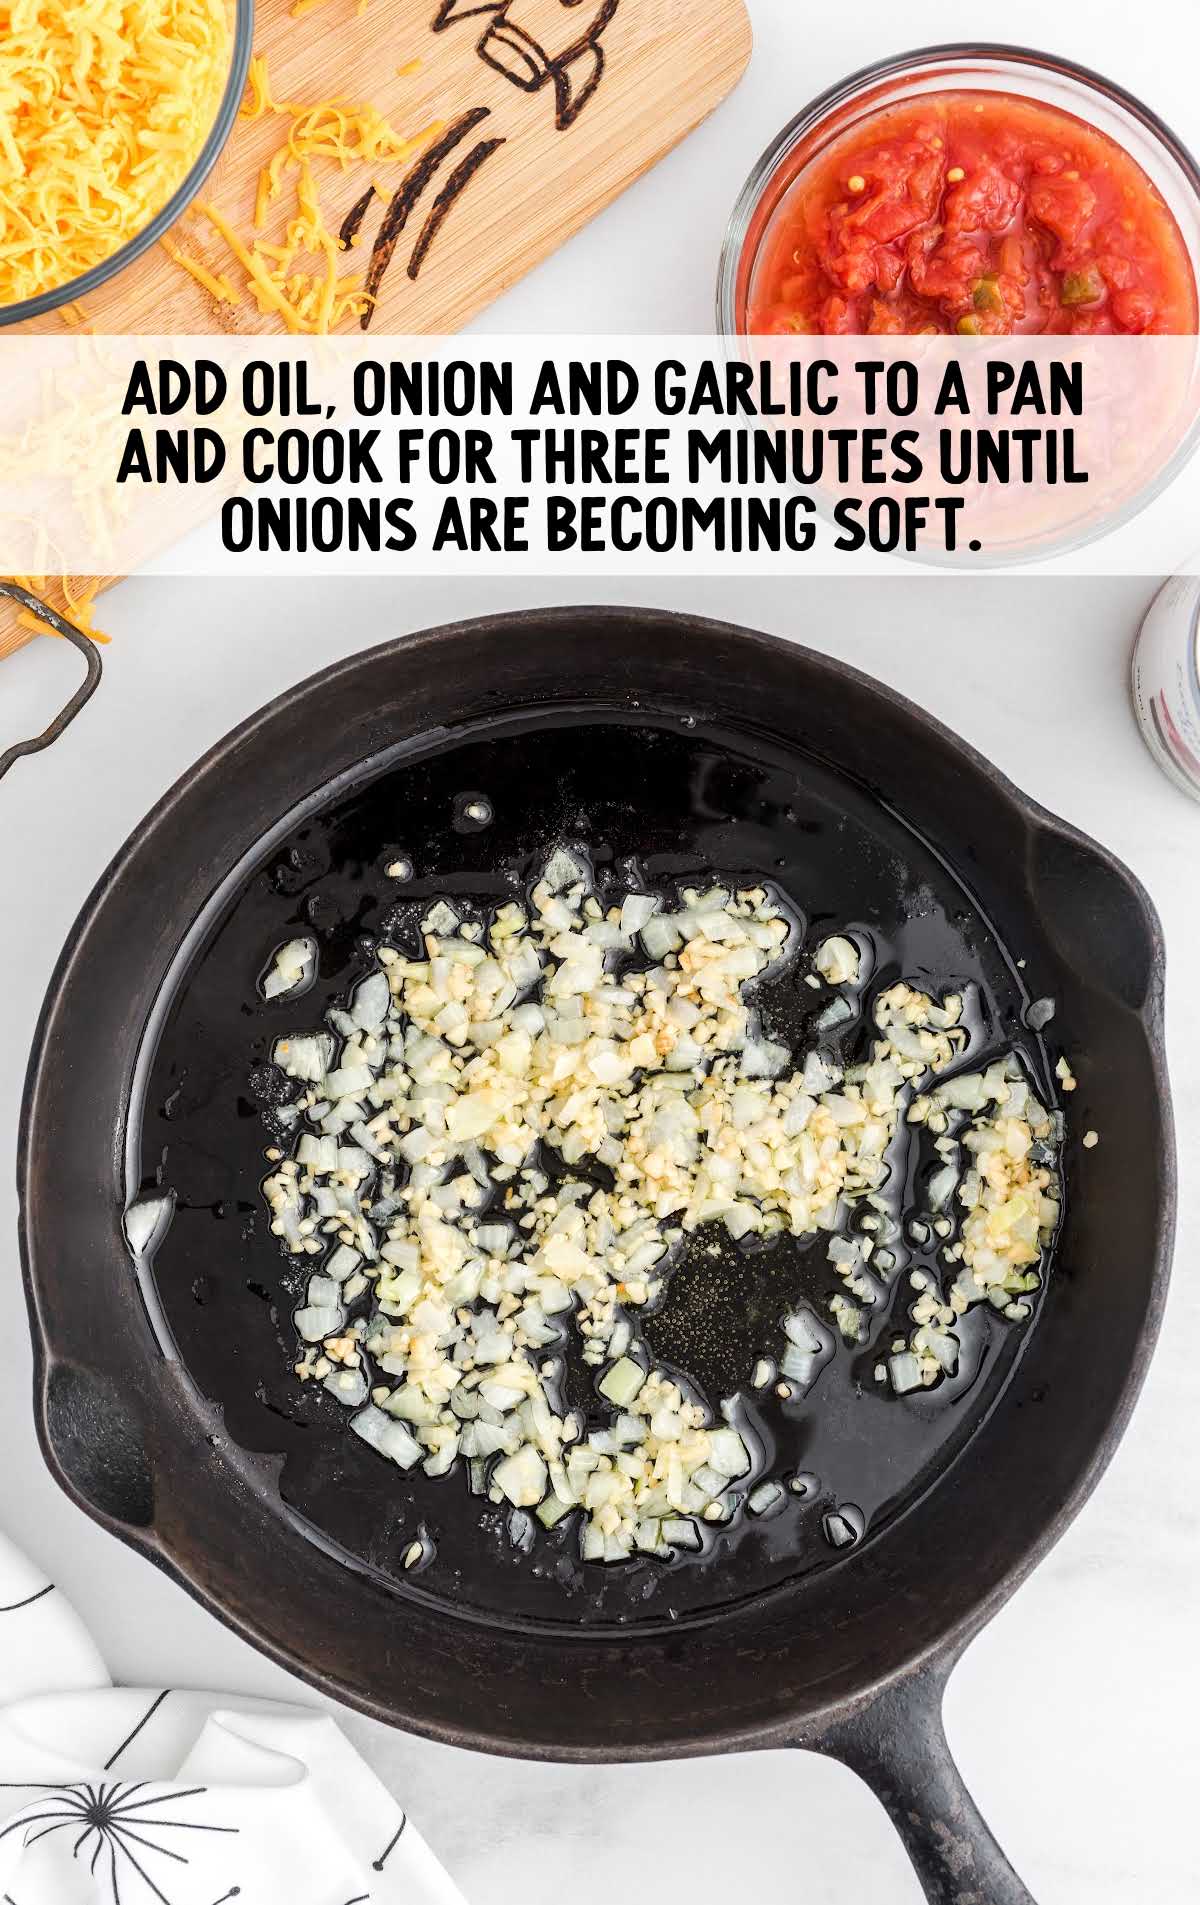 oil, onion, and garlic being cooked in a skillet